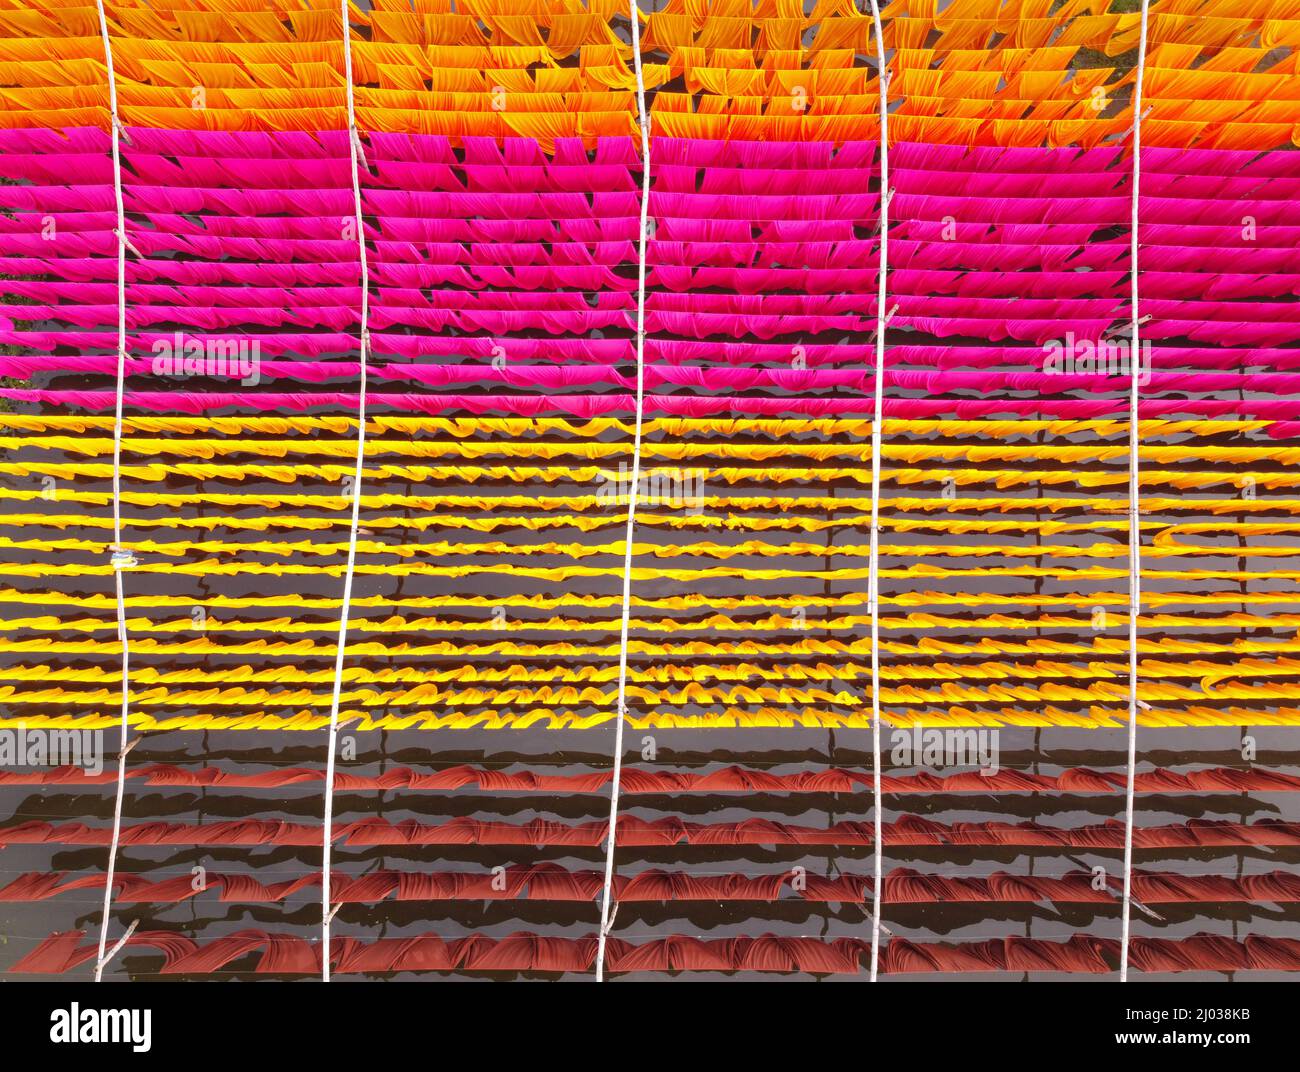 Narayanganj, Dhaka, Bangladesh. 16th Mar, 2022. Workers hang thousands of different colorful fabrics on iron wires tied between a bamboo framework and constantly turn them so that they dry perfectly in flooded field in Narayanganj, Bangladesh. Iron wires are used between a bamboo framework to create giant washing lines for the final part of the dying process as the fabrics are dried in the sun. Bright strands of blue, pink, orange and green-dyed cloths hang above the grassy field in a dazzling network of interlocking colors. This is the final part of the dying process after which the cloth is Stock Photo